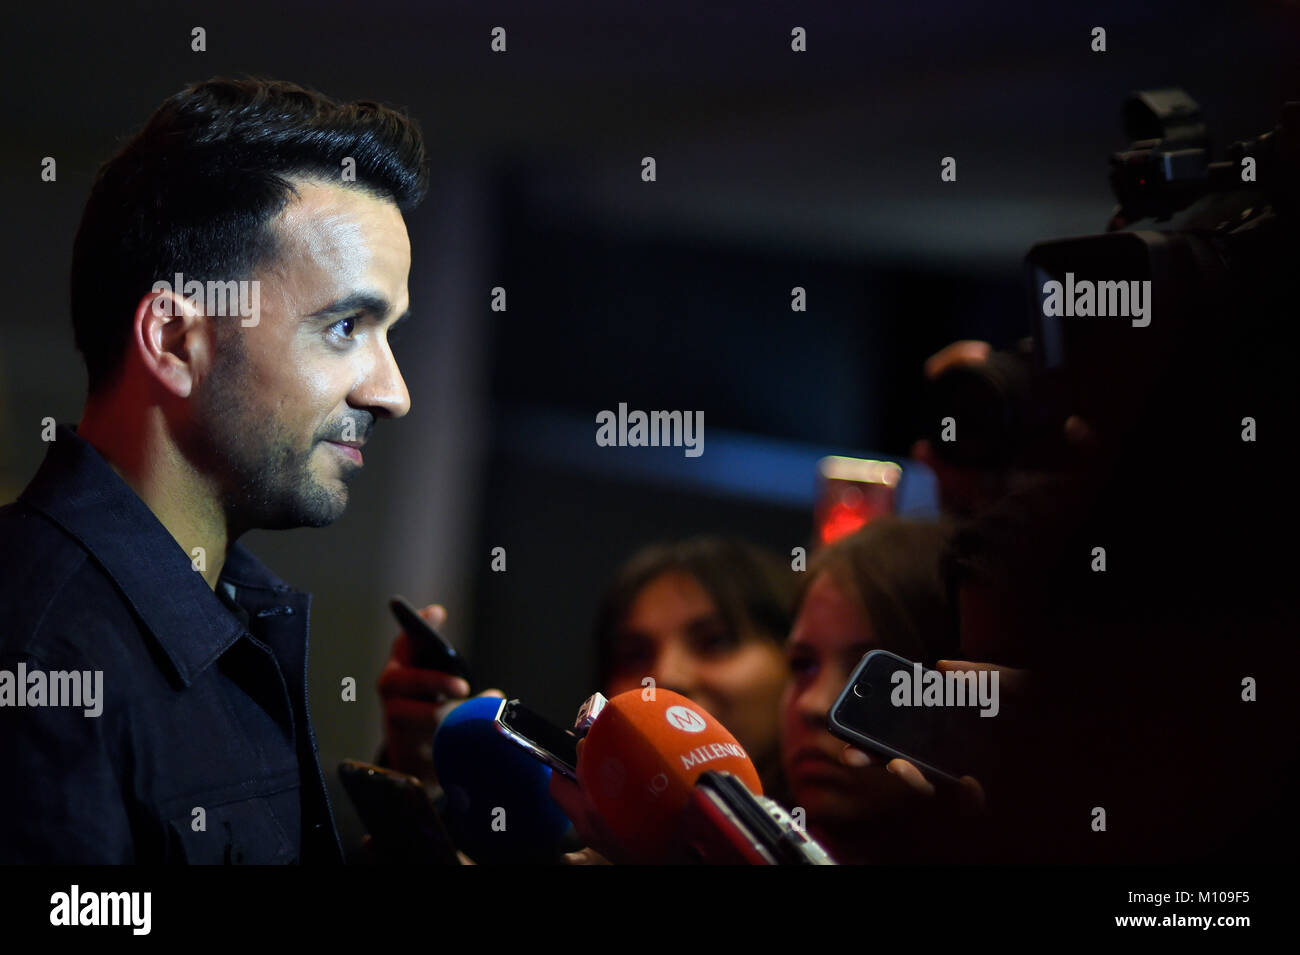 Mexico City, Mexico. 24th January, 2018.  Puerto Rico´s singer Luis Fonsi answer a questions during the red carpet of the Latin Grammy Acoustic Session in Mexico City. Photo: Alejandra Gonzalez Credit: Alejandra Gonzalez/Alamy Live News Stock Photo